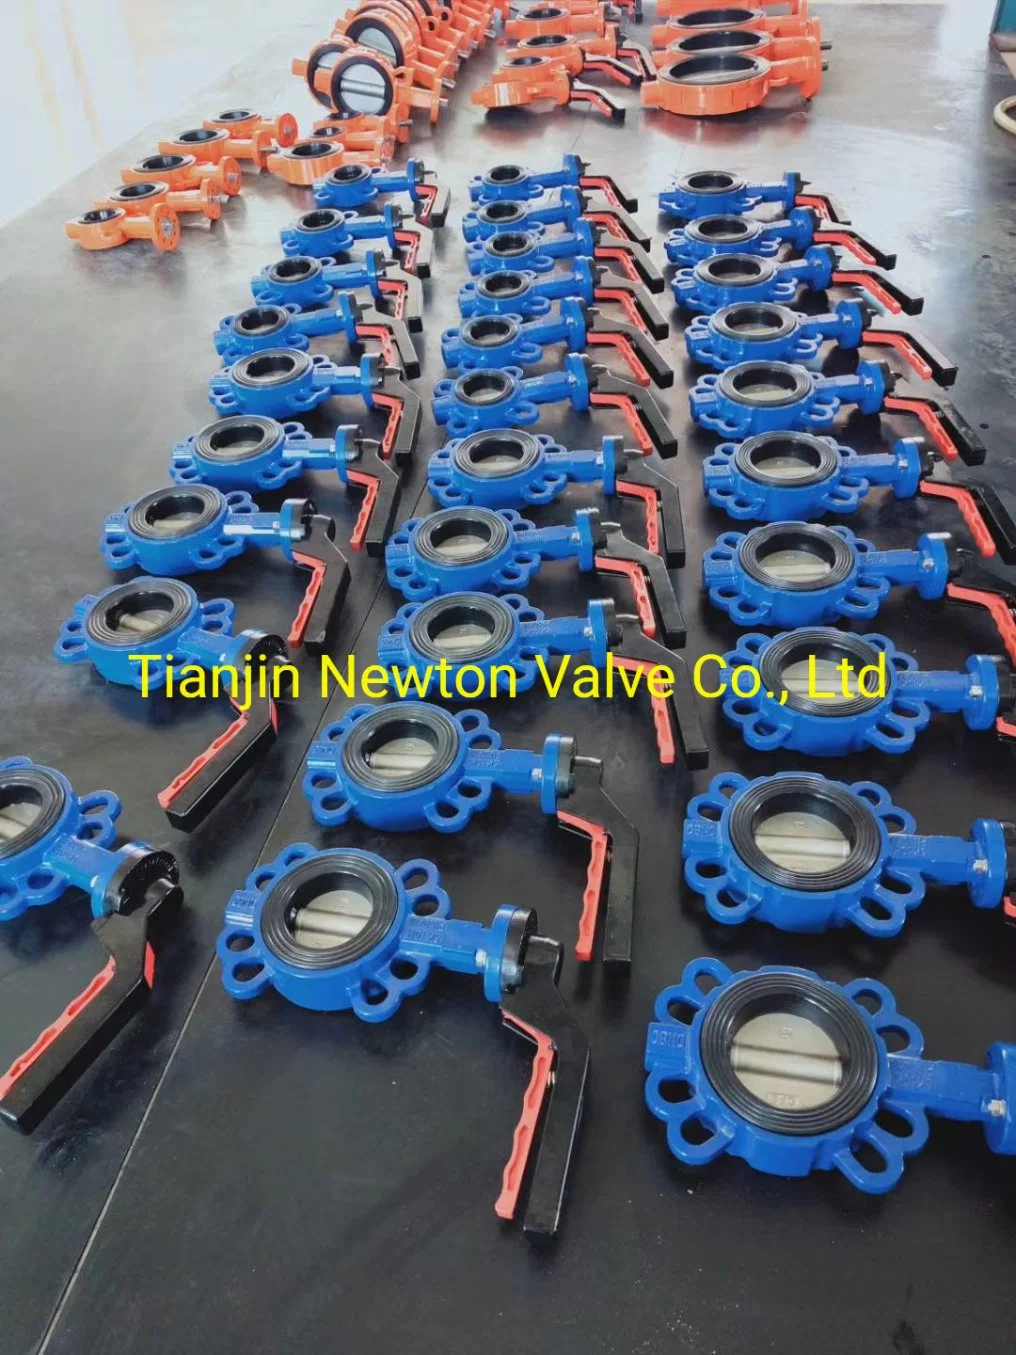 Ductile Cast Iron Carbon Steel Aluminium Alloy Al Bronze Duplex Stainless Steel Ggg40/50 Wcb A216 SS304 SS316 CF8 CF8m CF3 CF3m C954 ADC12 Butterfly Valve